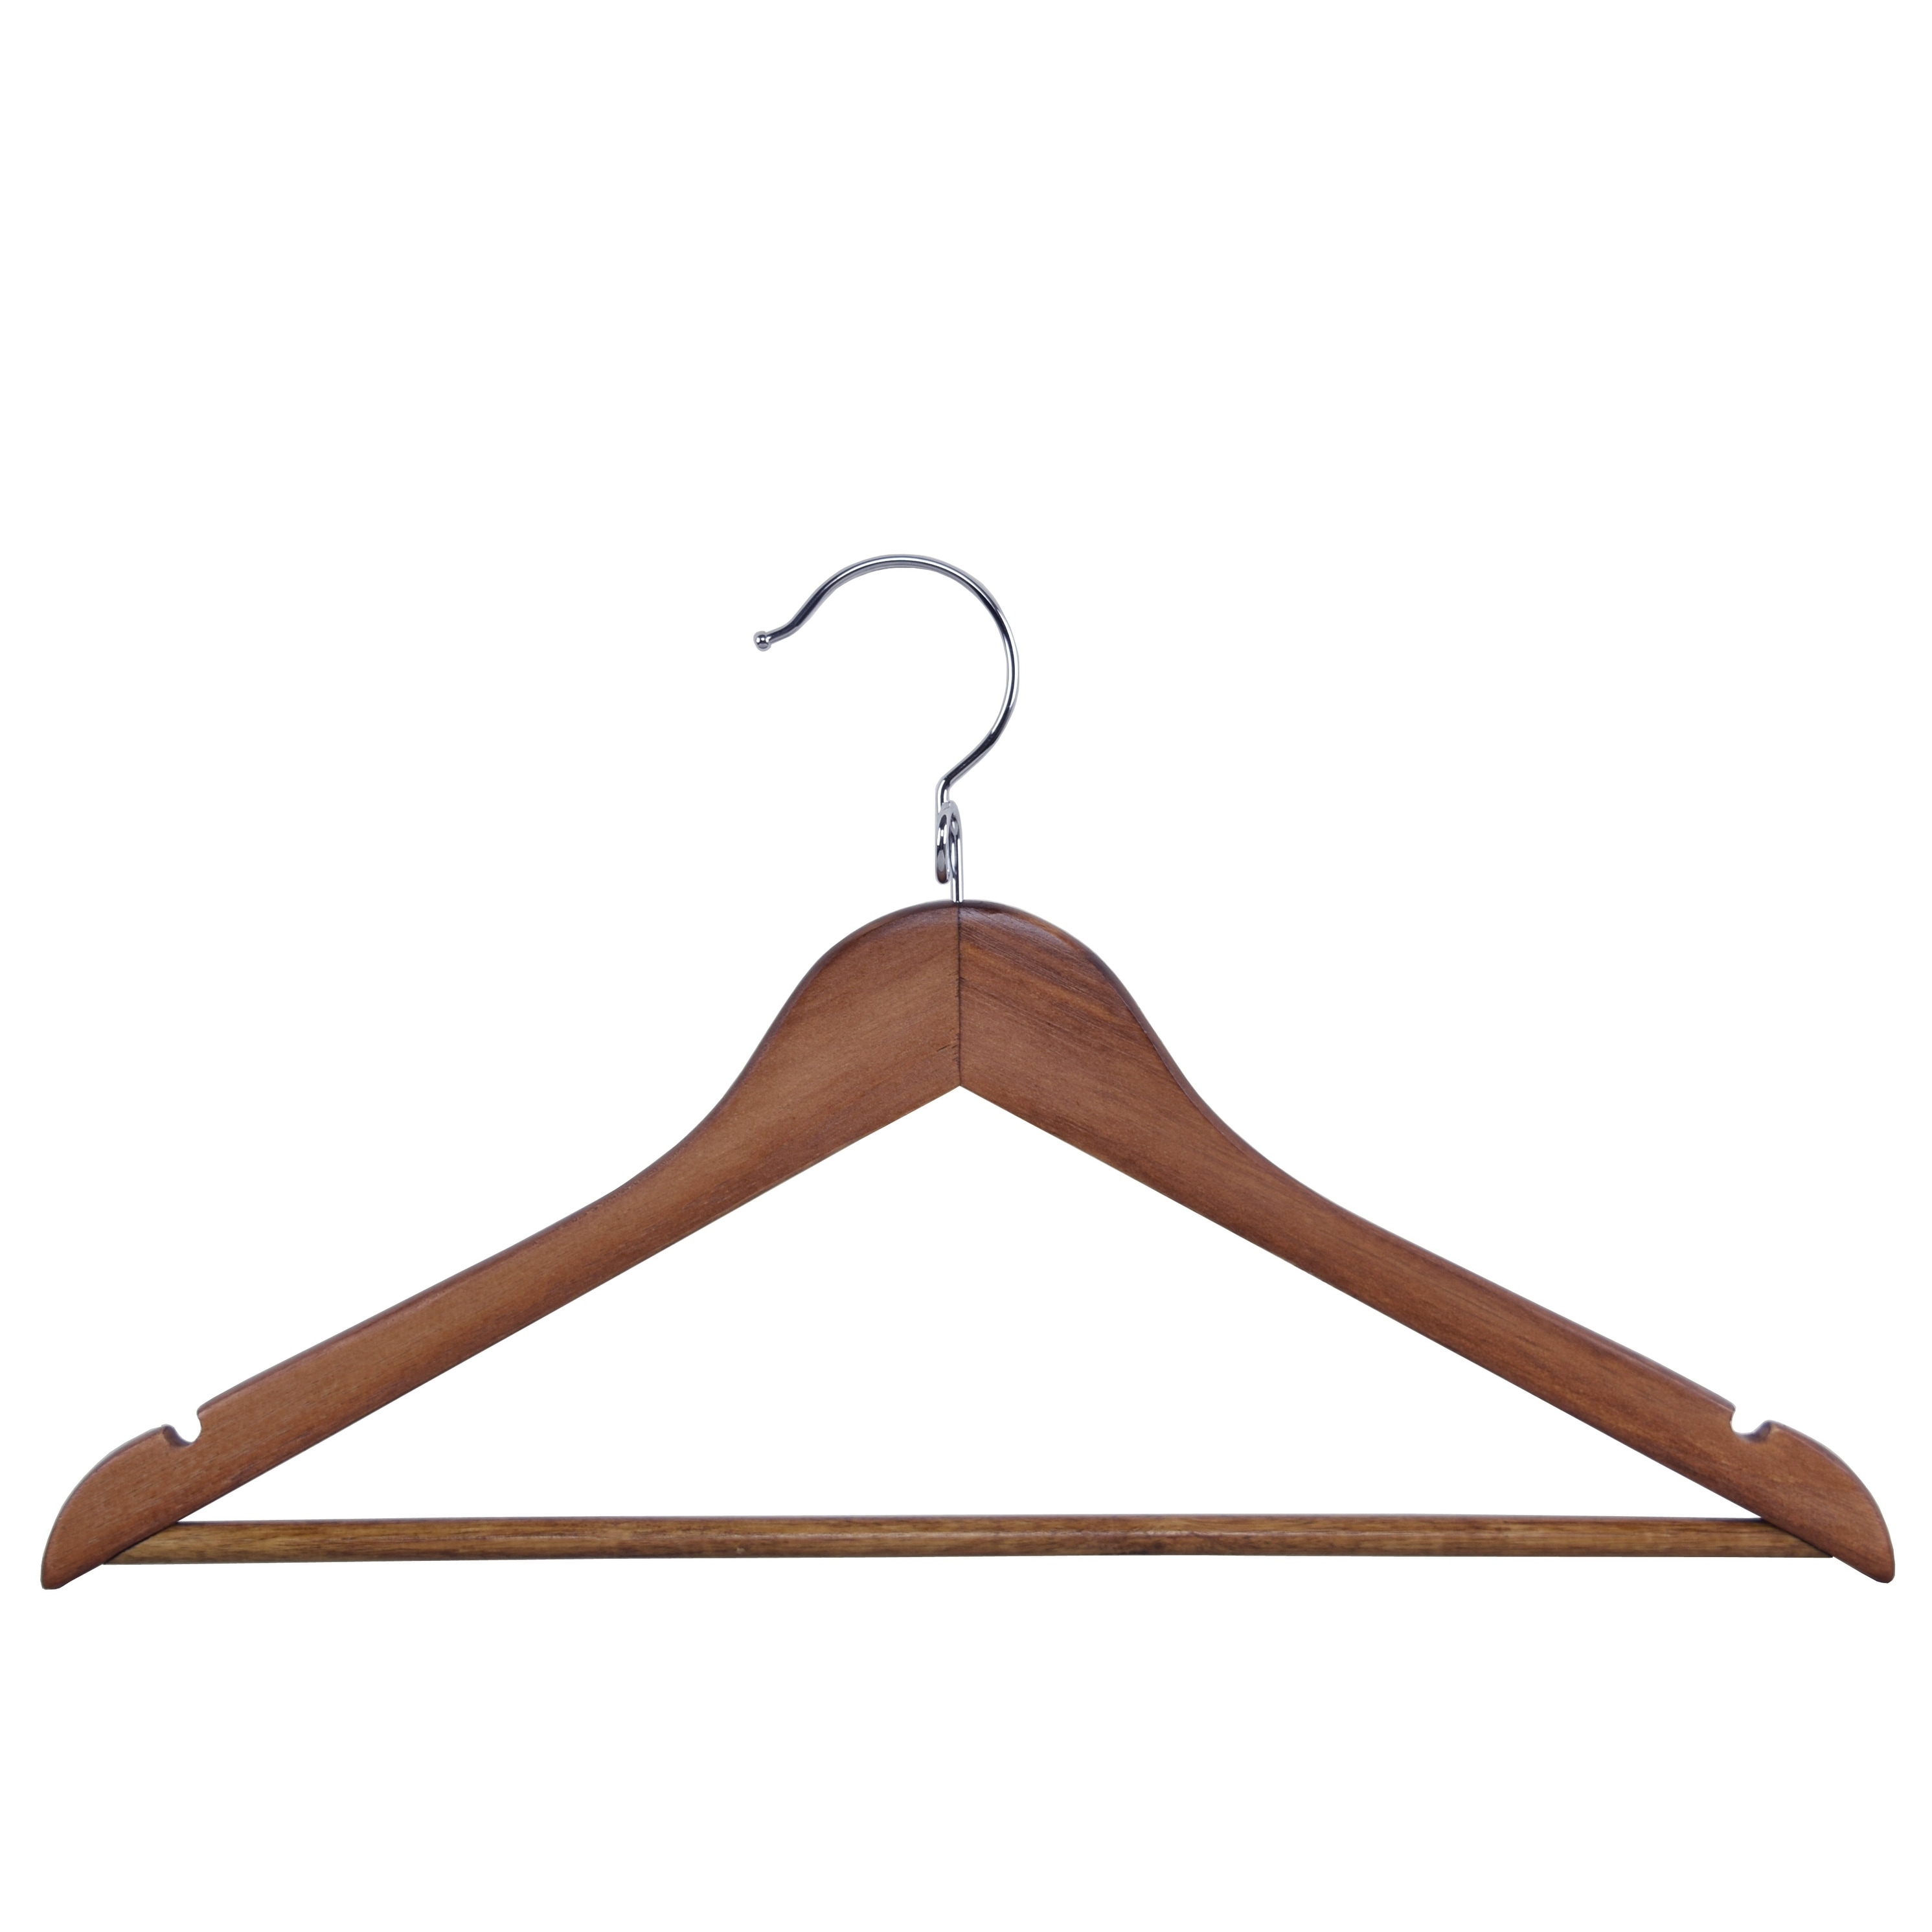 https://ak1.ostkcdn.com/images/products/is/images/direct/32a12c6bb99ea1cbb559b63239c9eef040966502/Proman-Products-15%22-Kascade-Wooden-Hangers-50-Pack-for-Women-and-Kids-Clothing%2C-Space-Saving-Pants-Clothes-Hanger.jpg